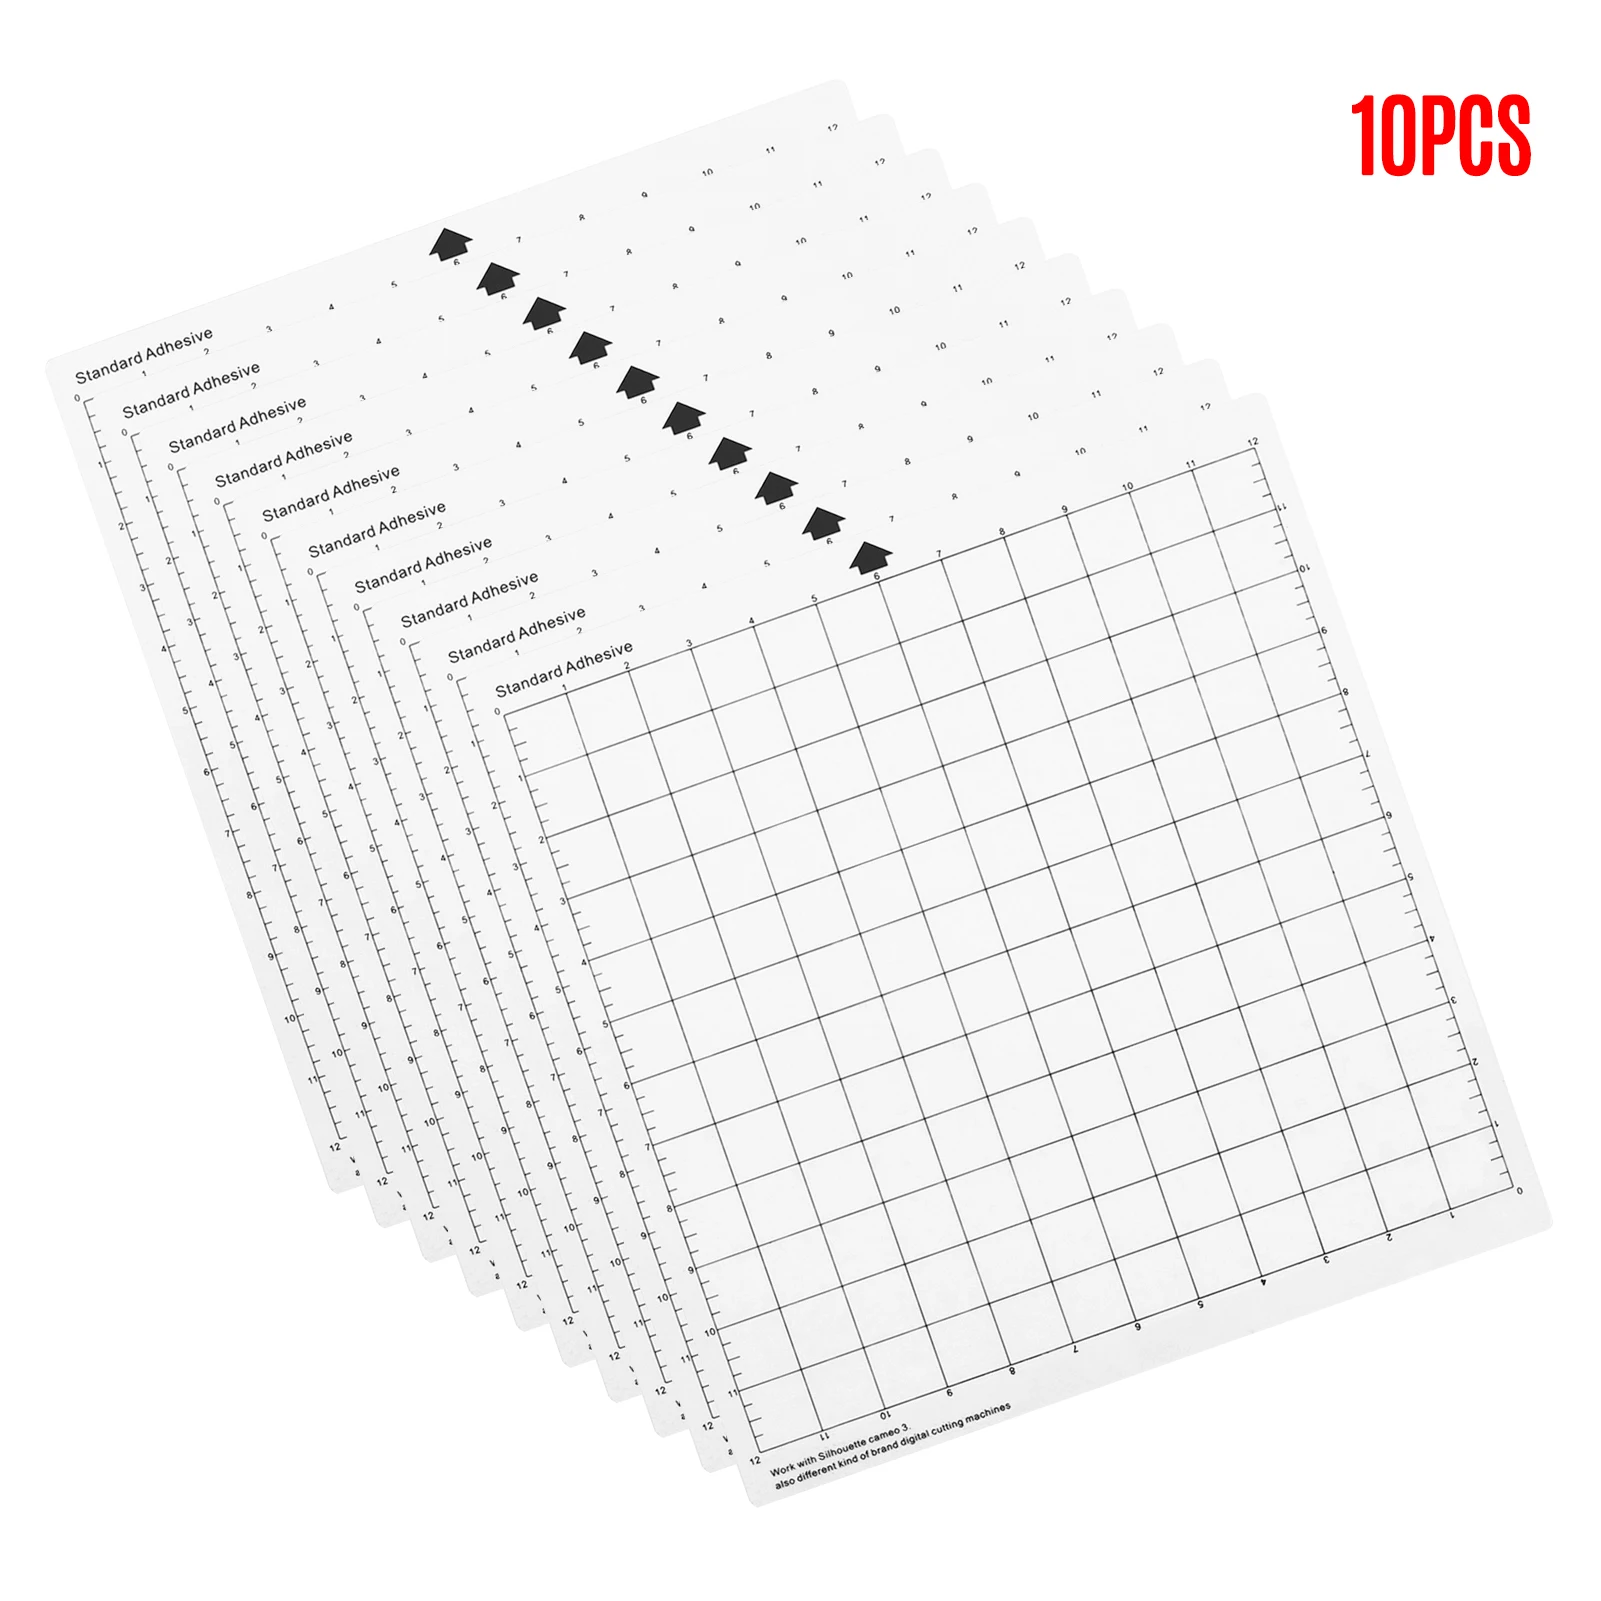 10PCS Replacement Cutting Mat Transparent Adhesive Cricut Mat with Measuring Grid 12-Inch for Silhouette Explore Plotter Machine